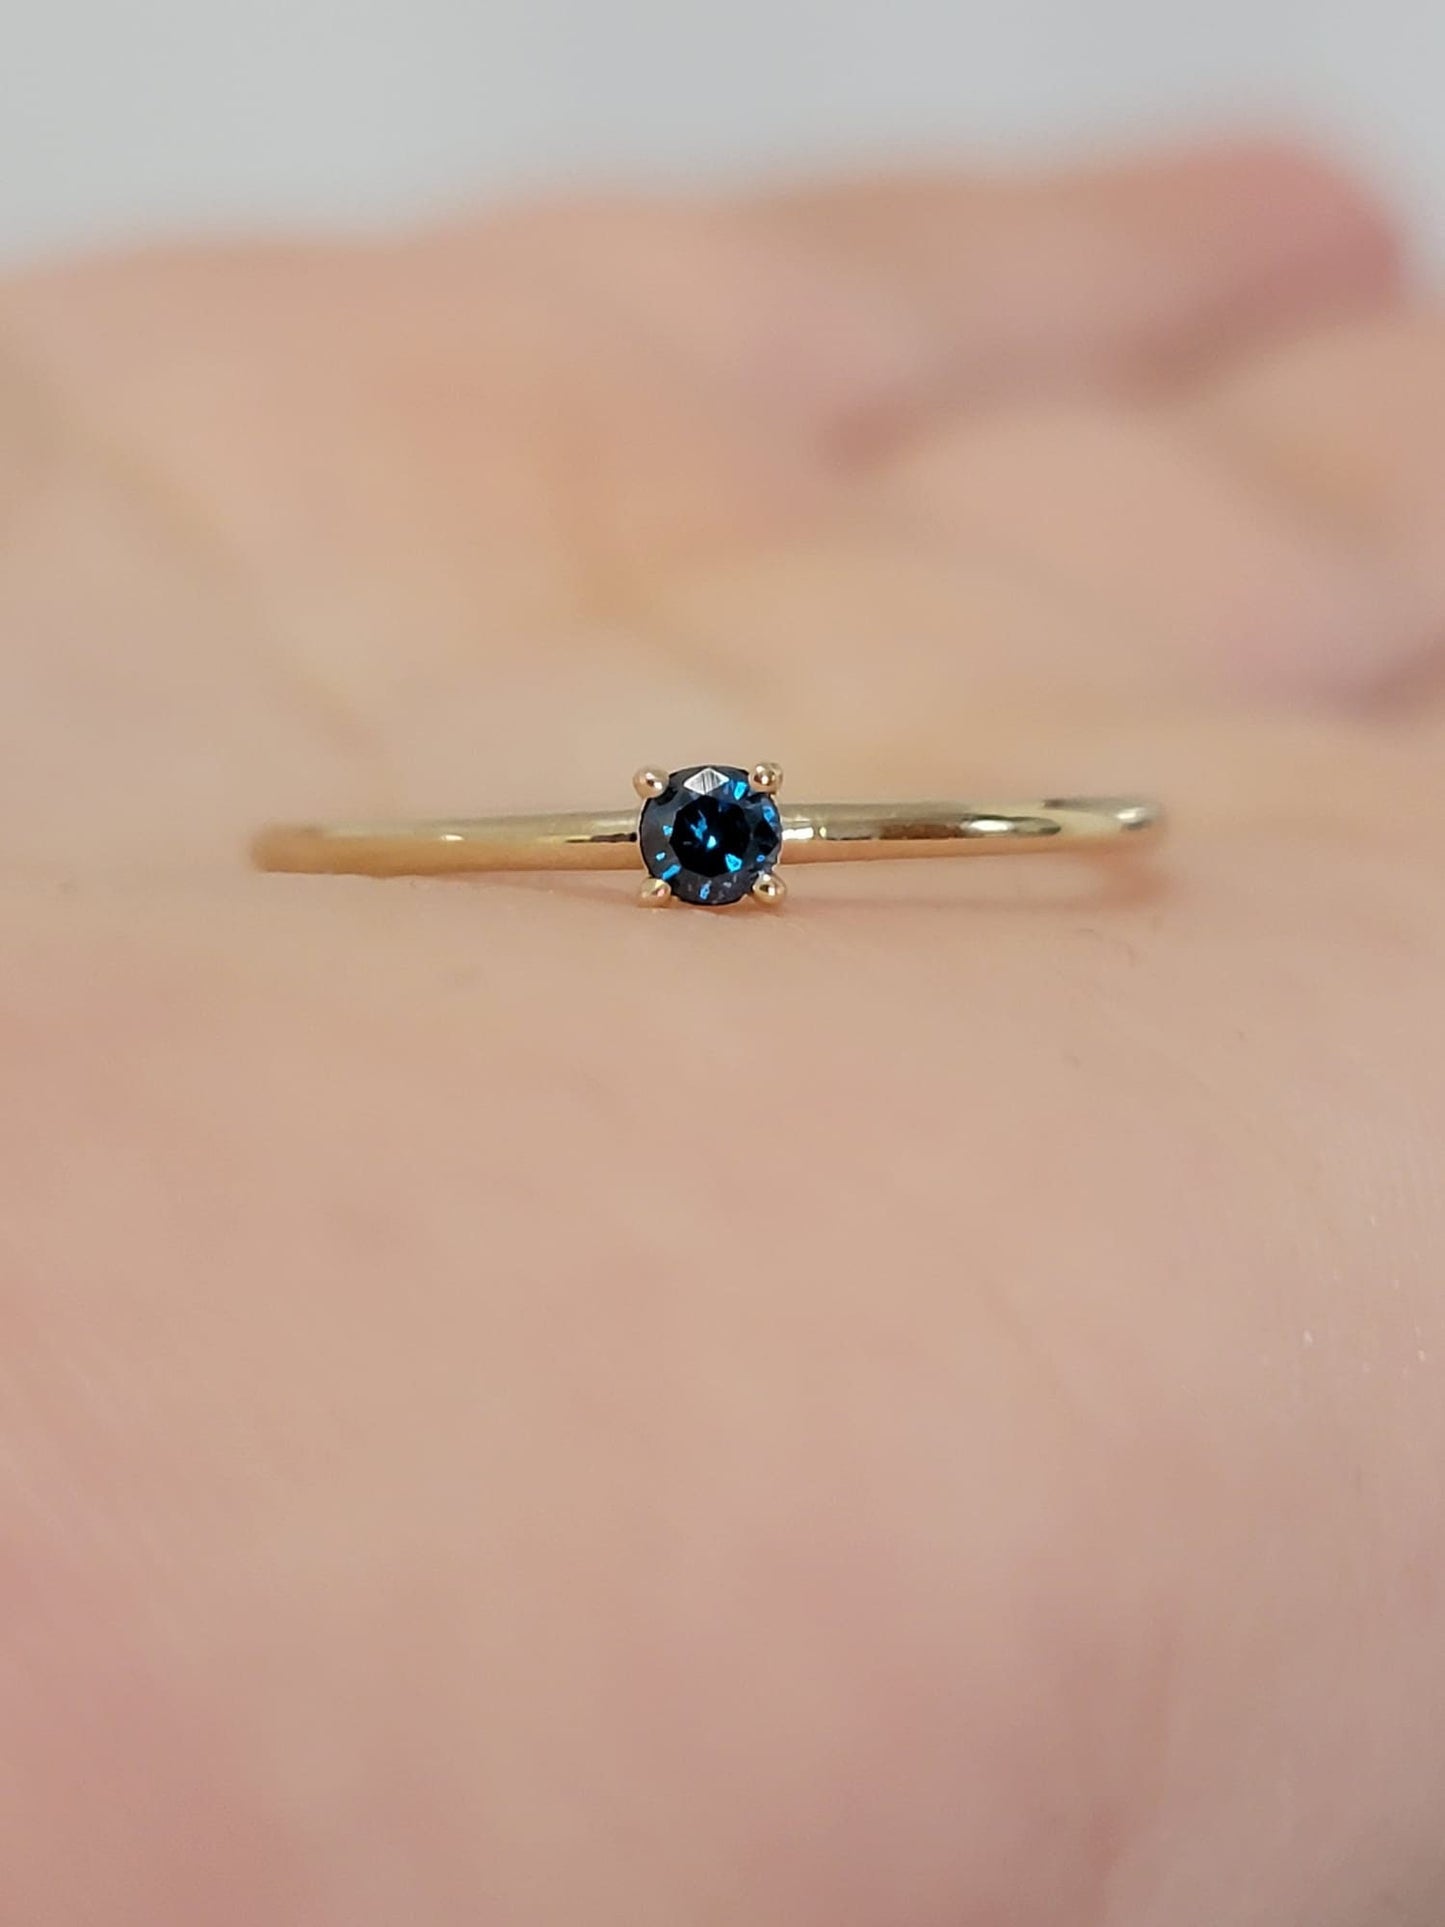 Natural Blue Diamond Ring In 14k Gold, 4 Prong Ring Blue Diamond Ring, Blue Diamond Wedding Ring, Blue Diamond Engagement Band, Gift for Her